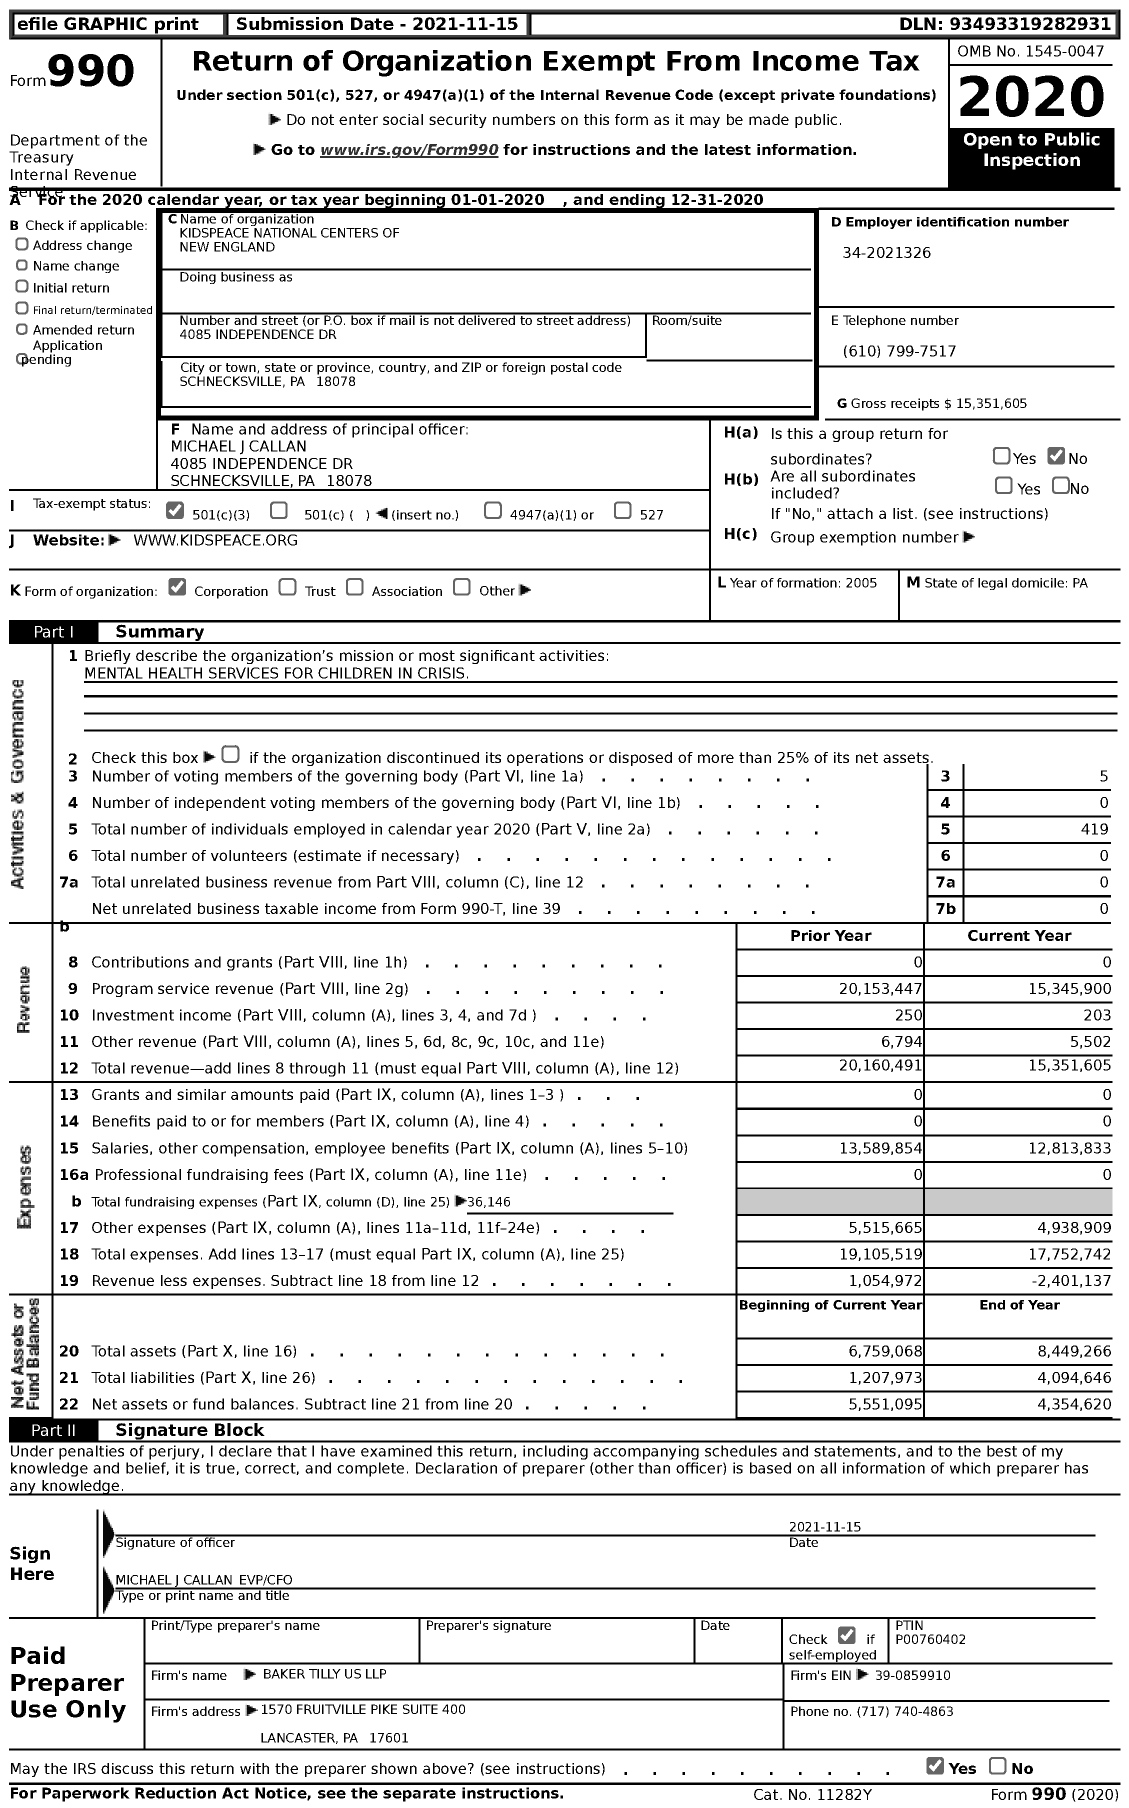 Image of first page of 2020 Form 990 for KidsPeace National Centers of New England